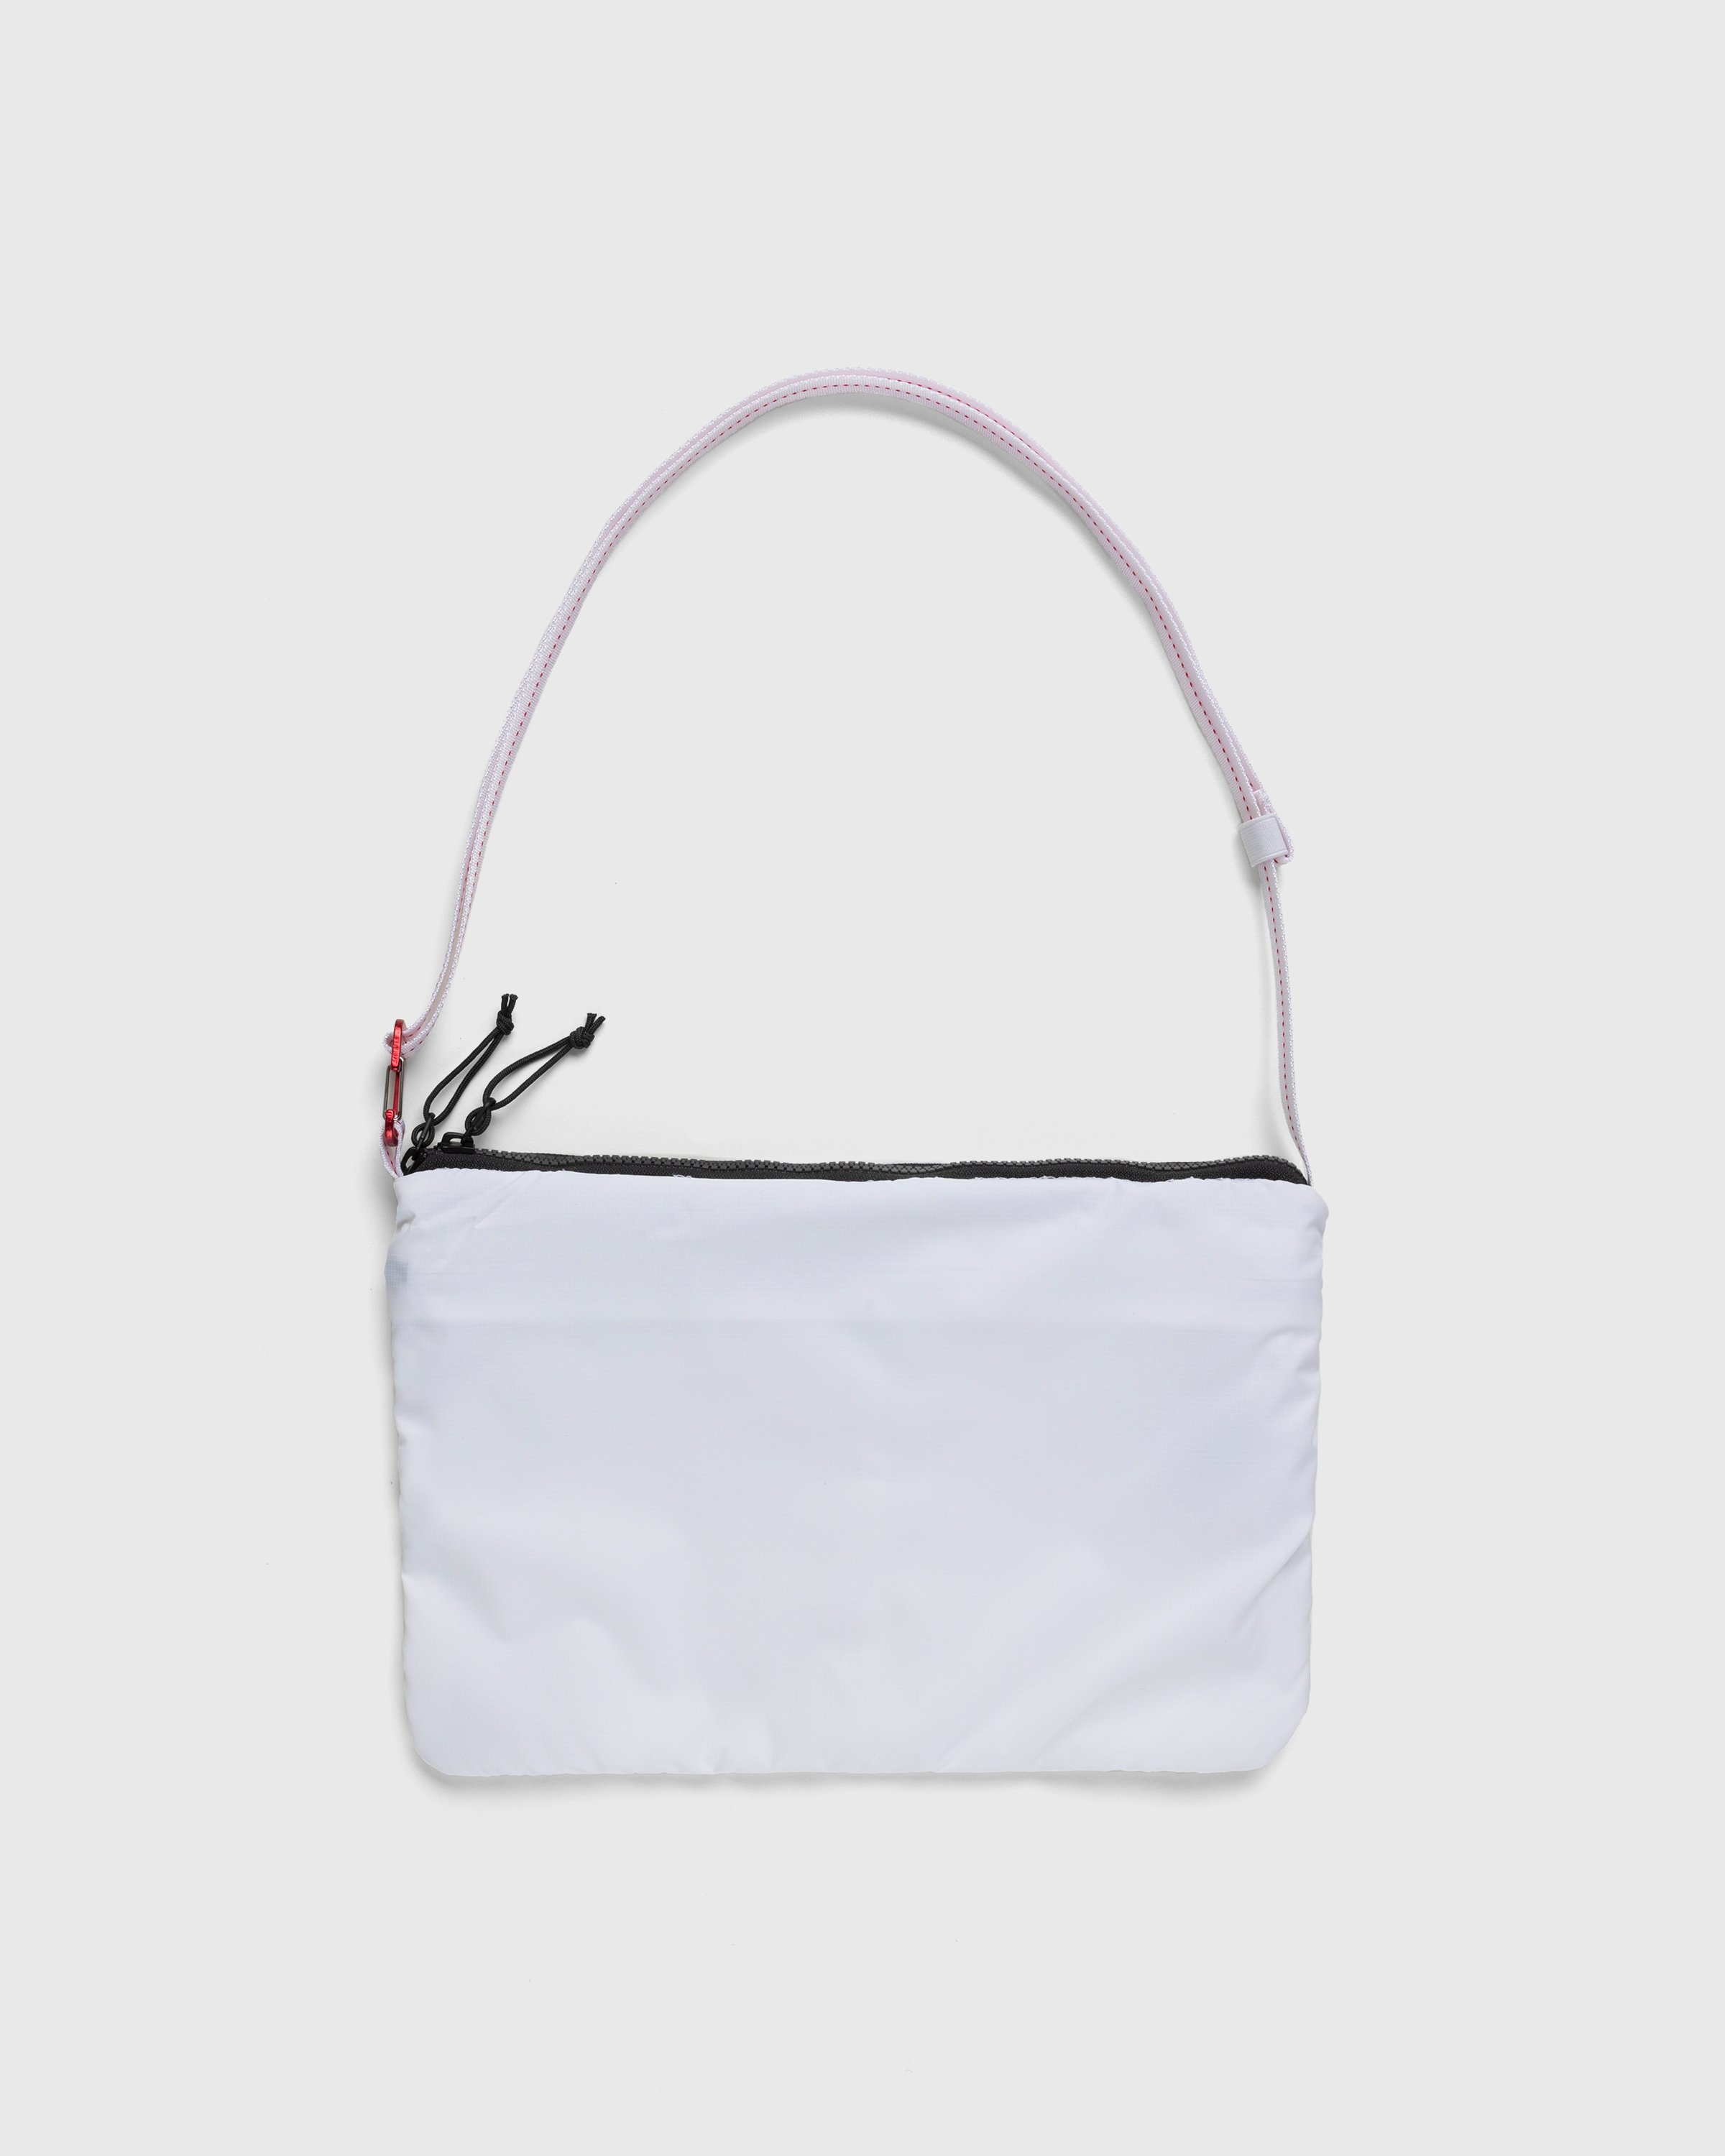 The North Face - Flyweight Shoulder Bag White/Asphalt Grey/Red - Accessories - White - Image 2